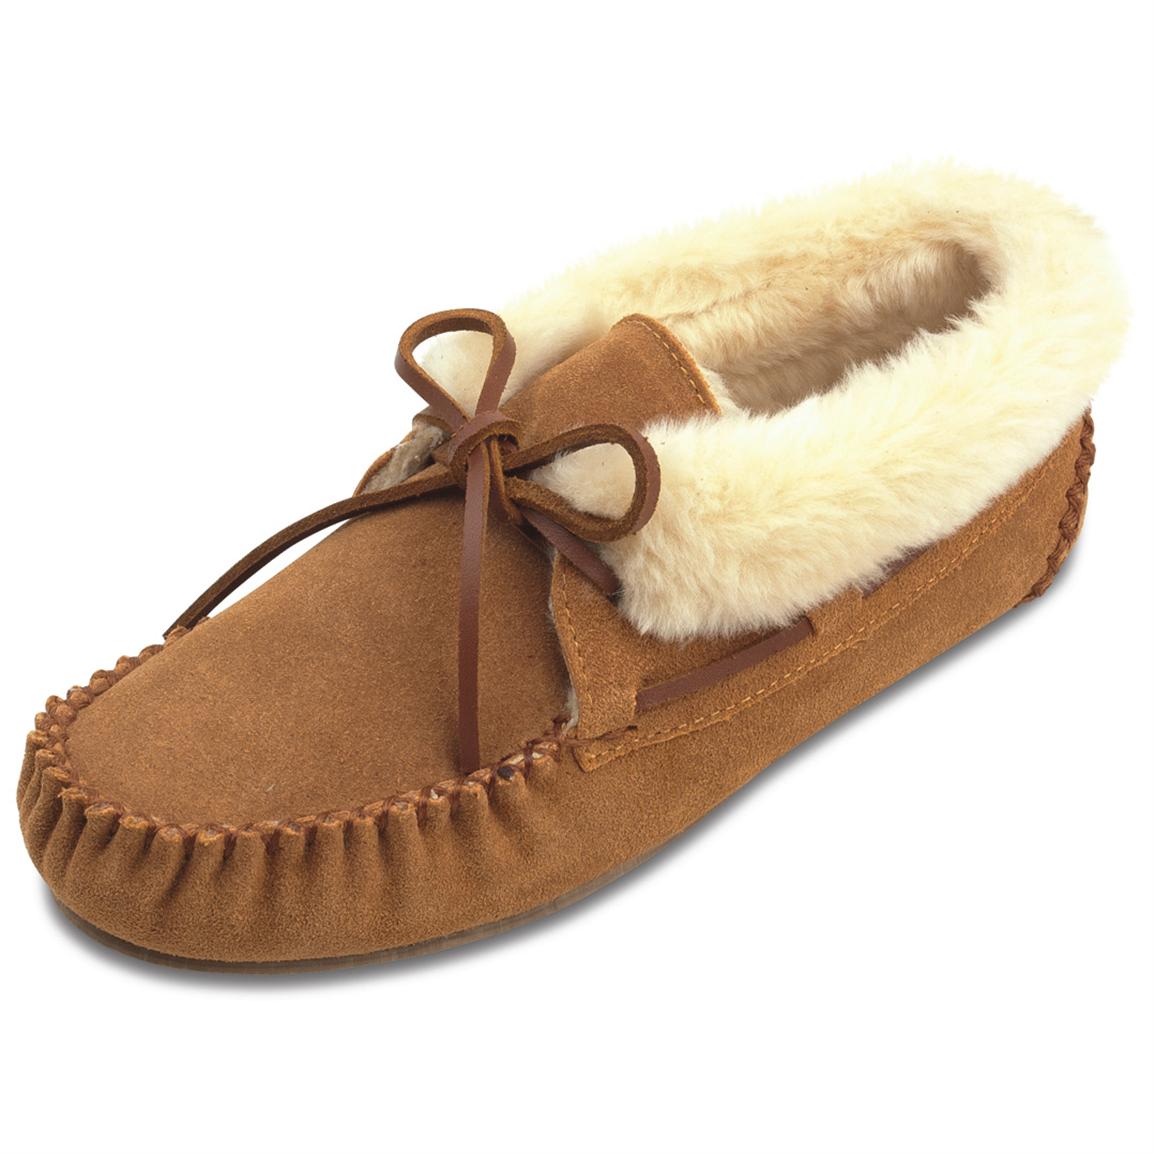 moccasin bootie slippers